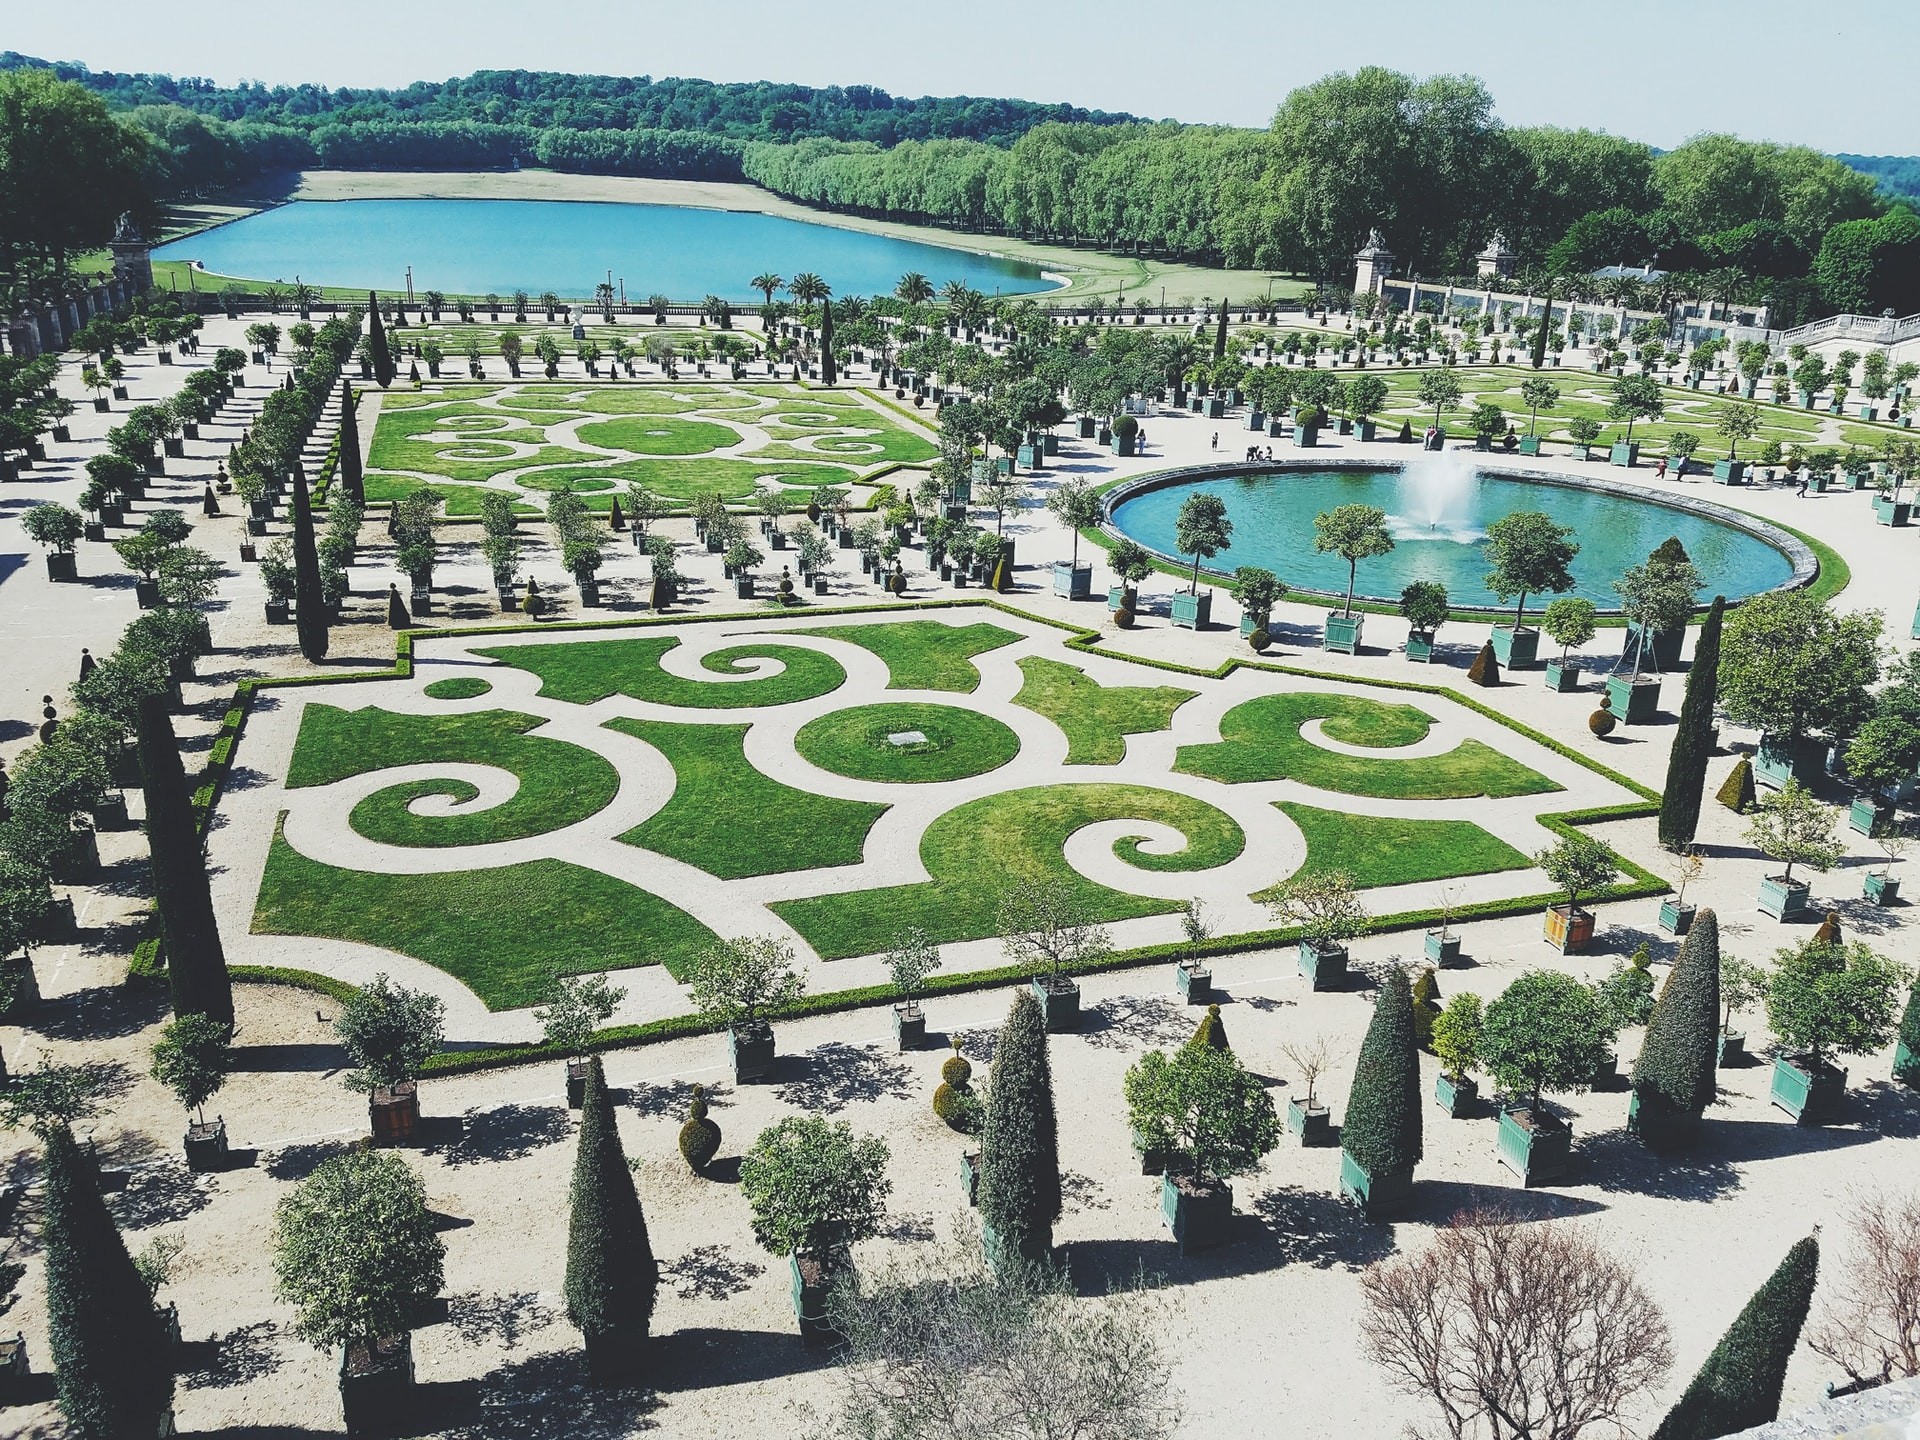 The gardens of Versailles are a great way to teach students about real-life geometry